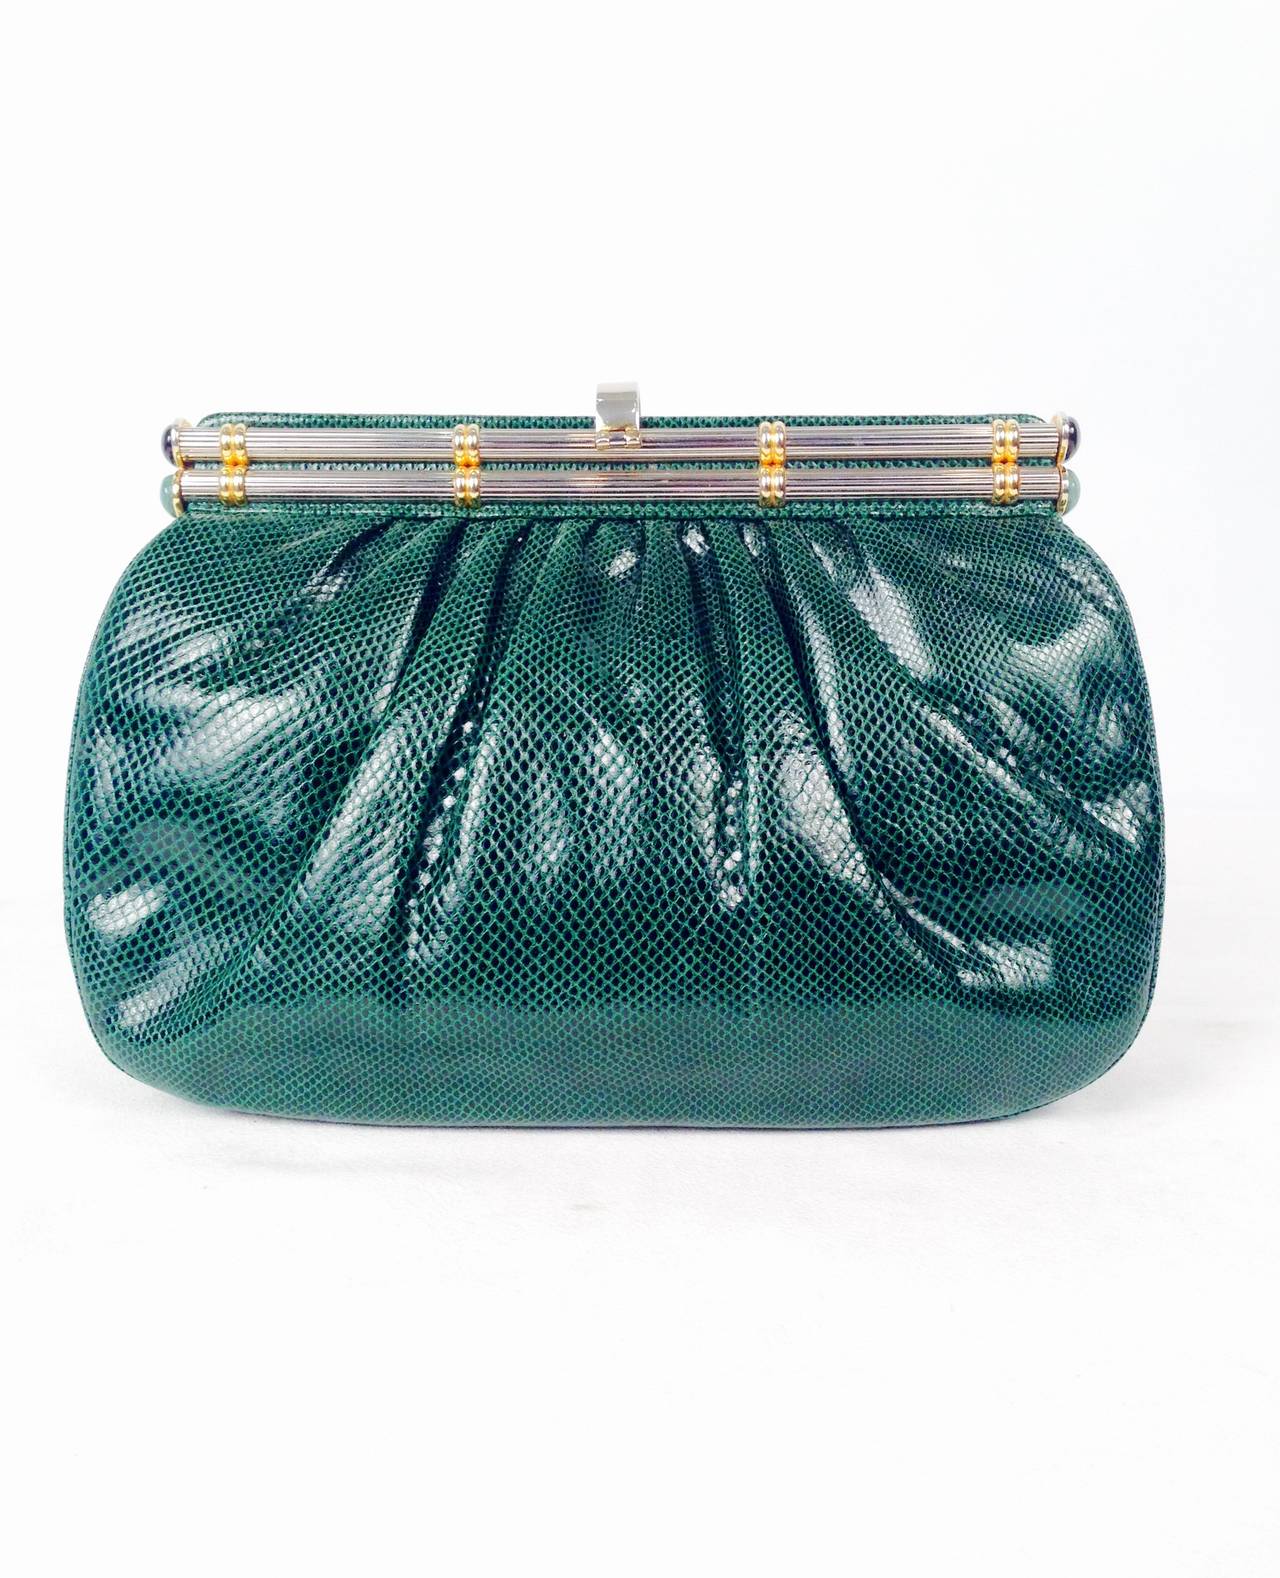 Vintage Judith Leiber Emerald Lizard Evening Convertible Clutch In Excellent Condition For Sale In Palm Beach, FL